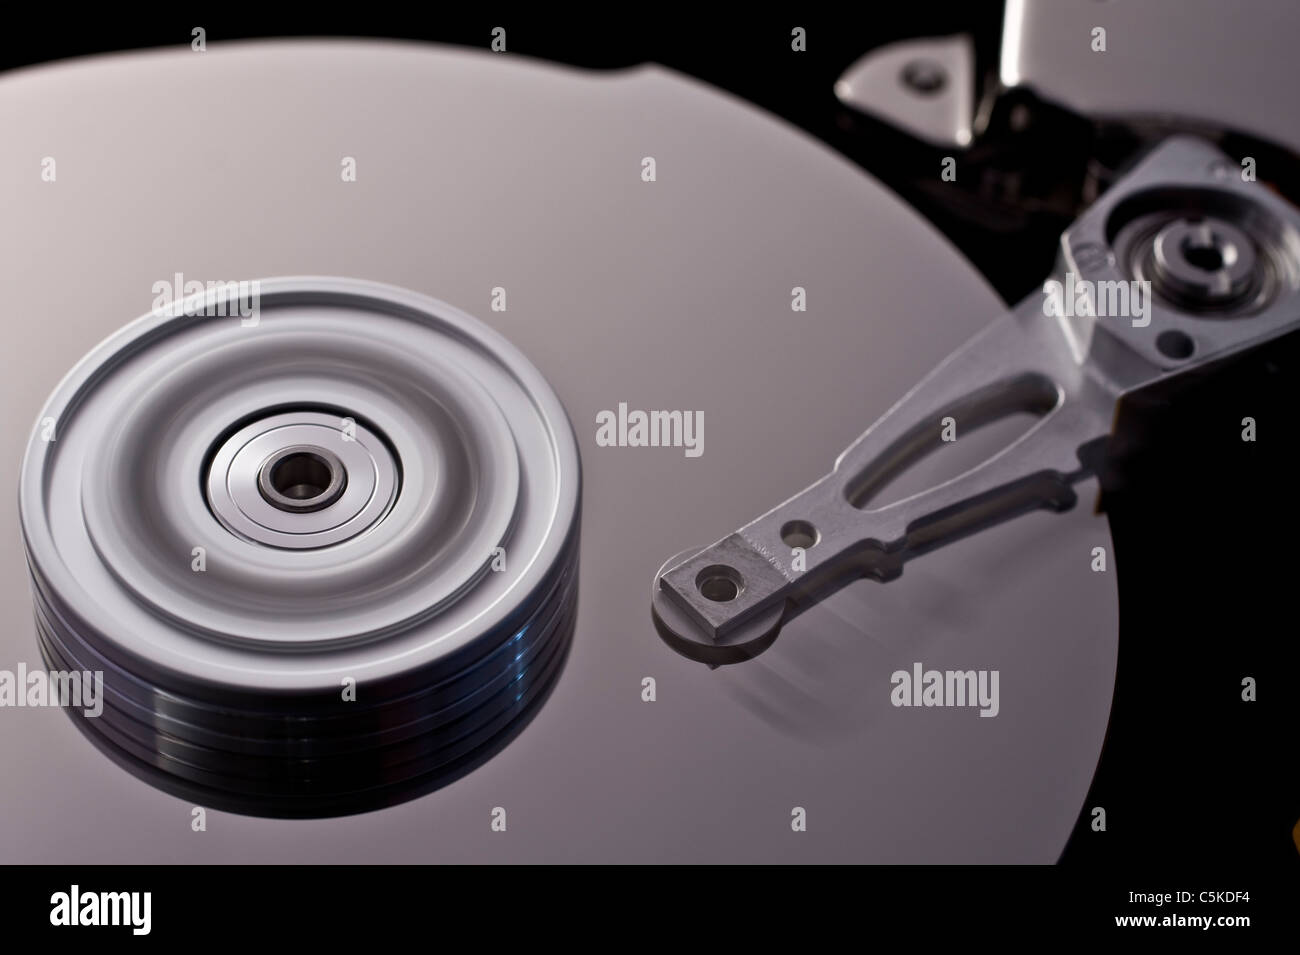 hard disk drive in motion with nice blur in background Stock Photo